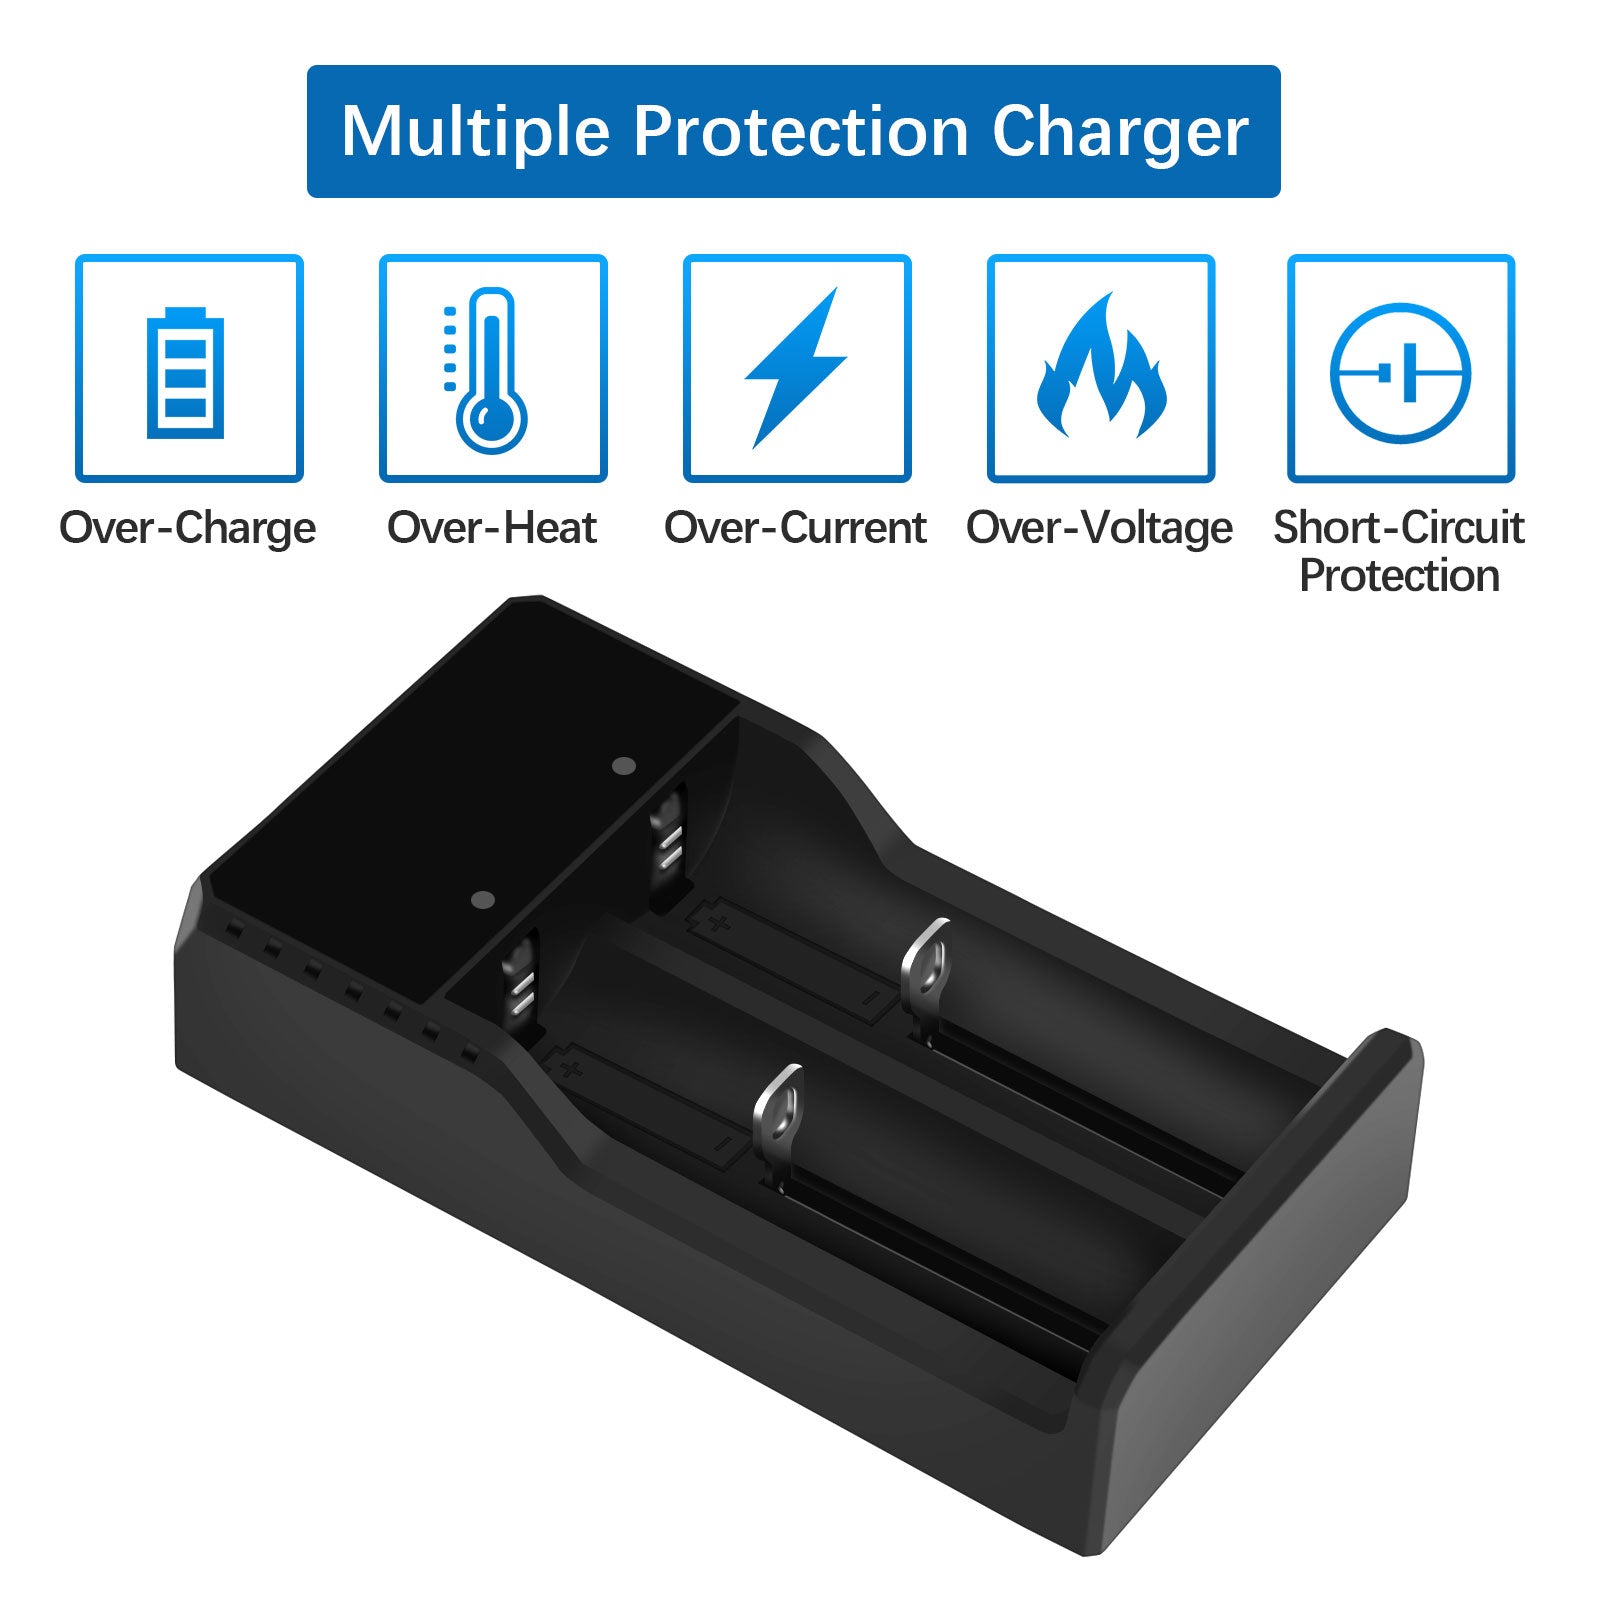 DX-5 Pro USB Charger